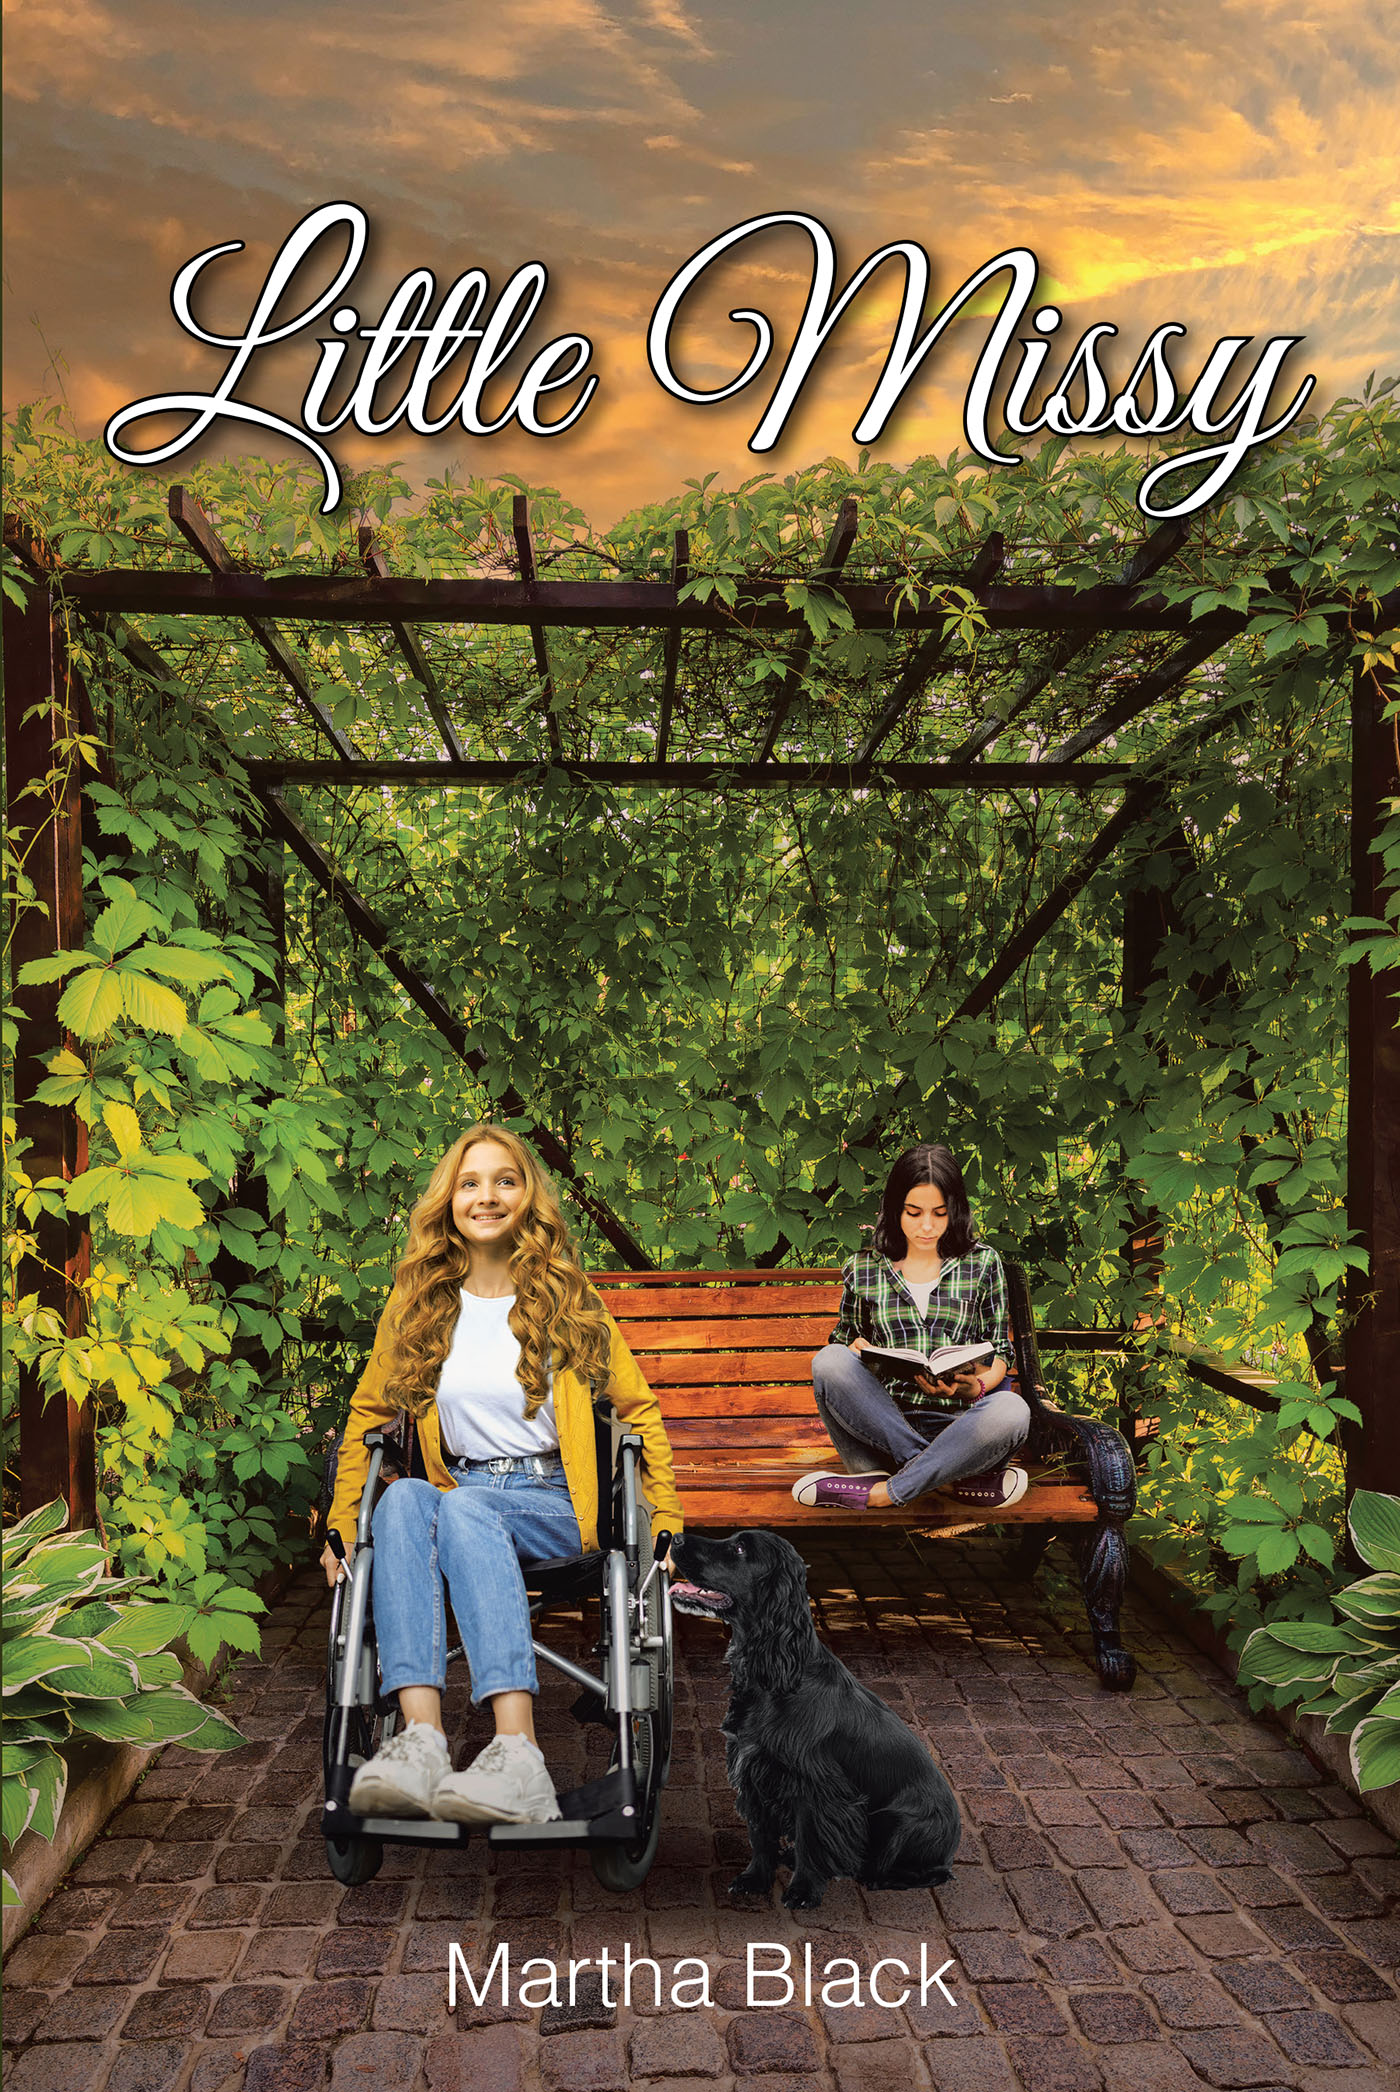 Martha Black’s Newly Released "Little Missy" is an Engaging Fiction That Explores Important Social Issues with Compassion